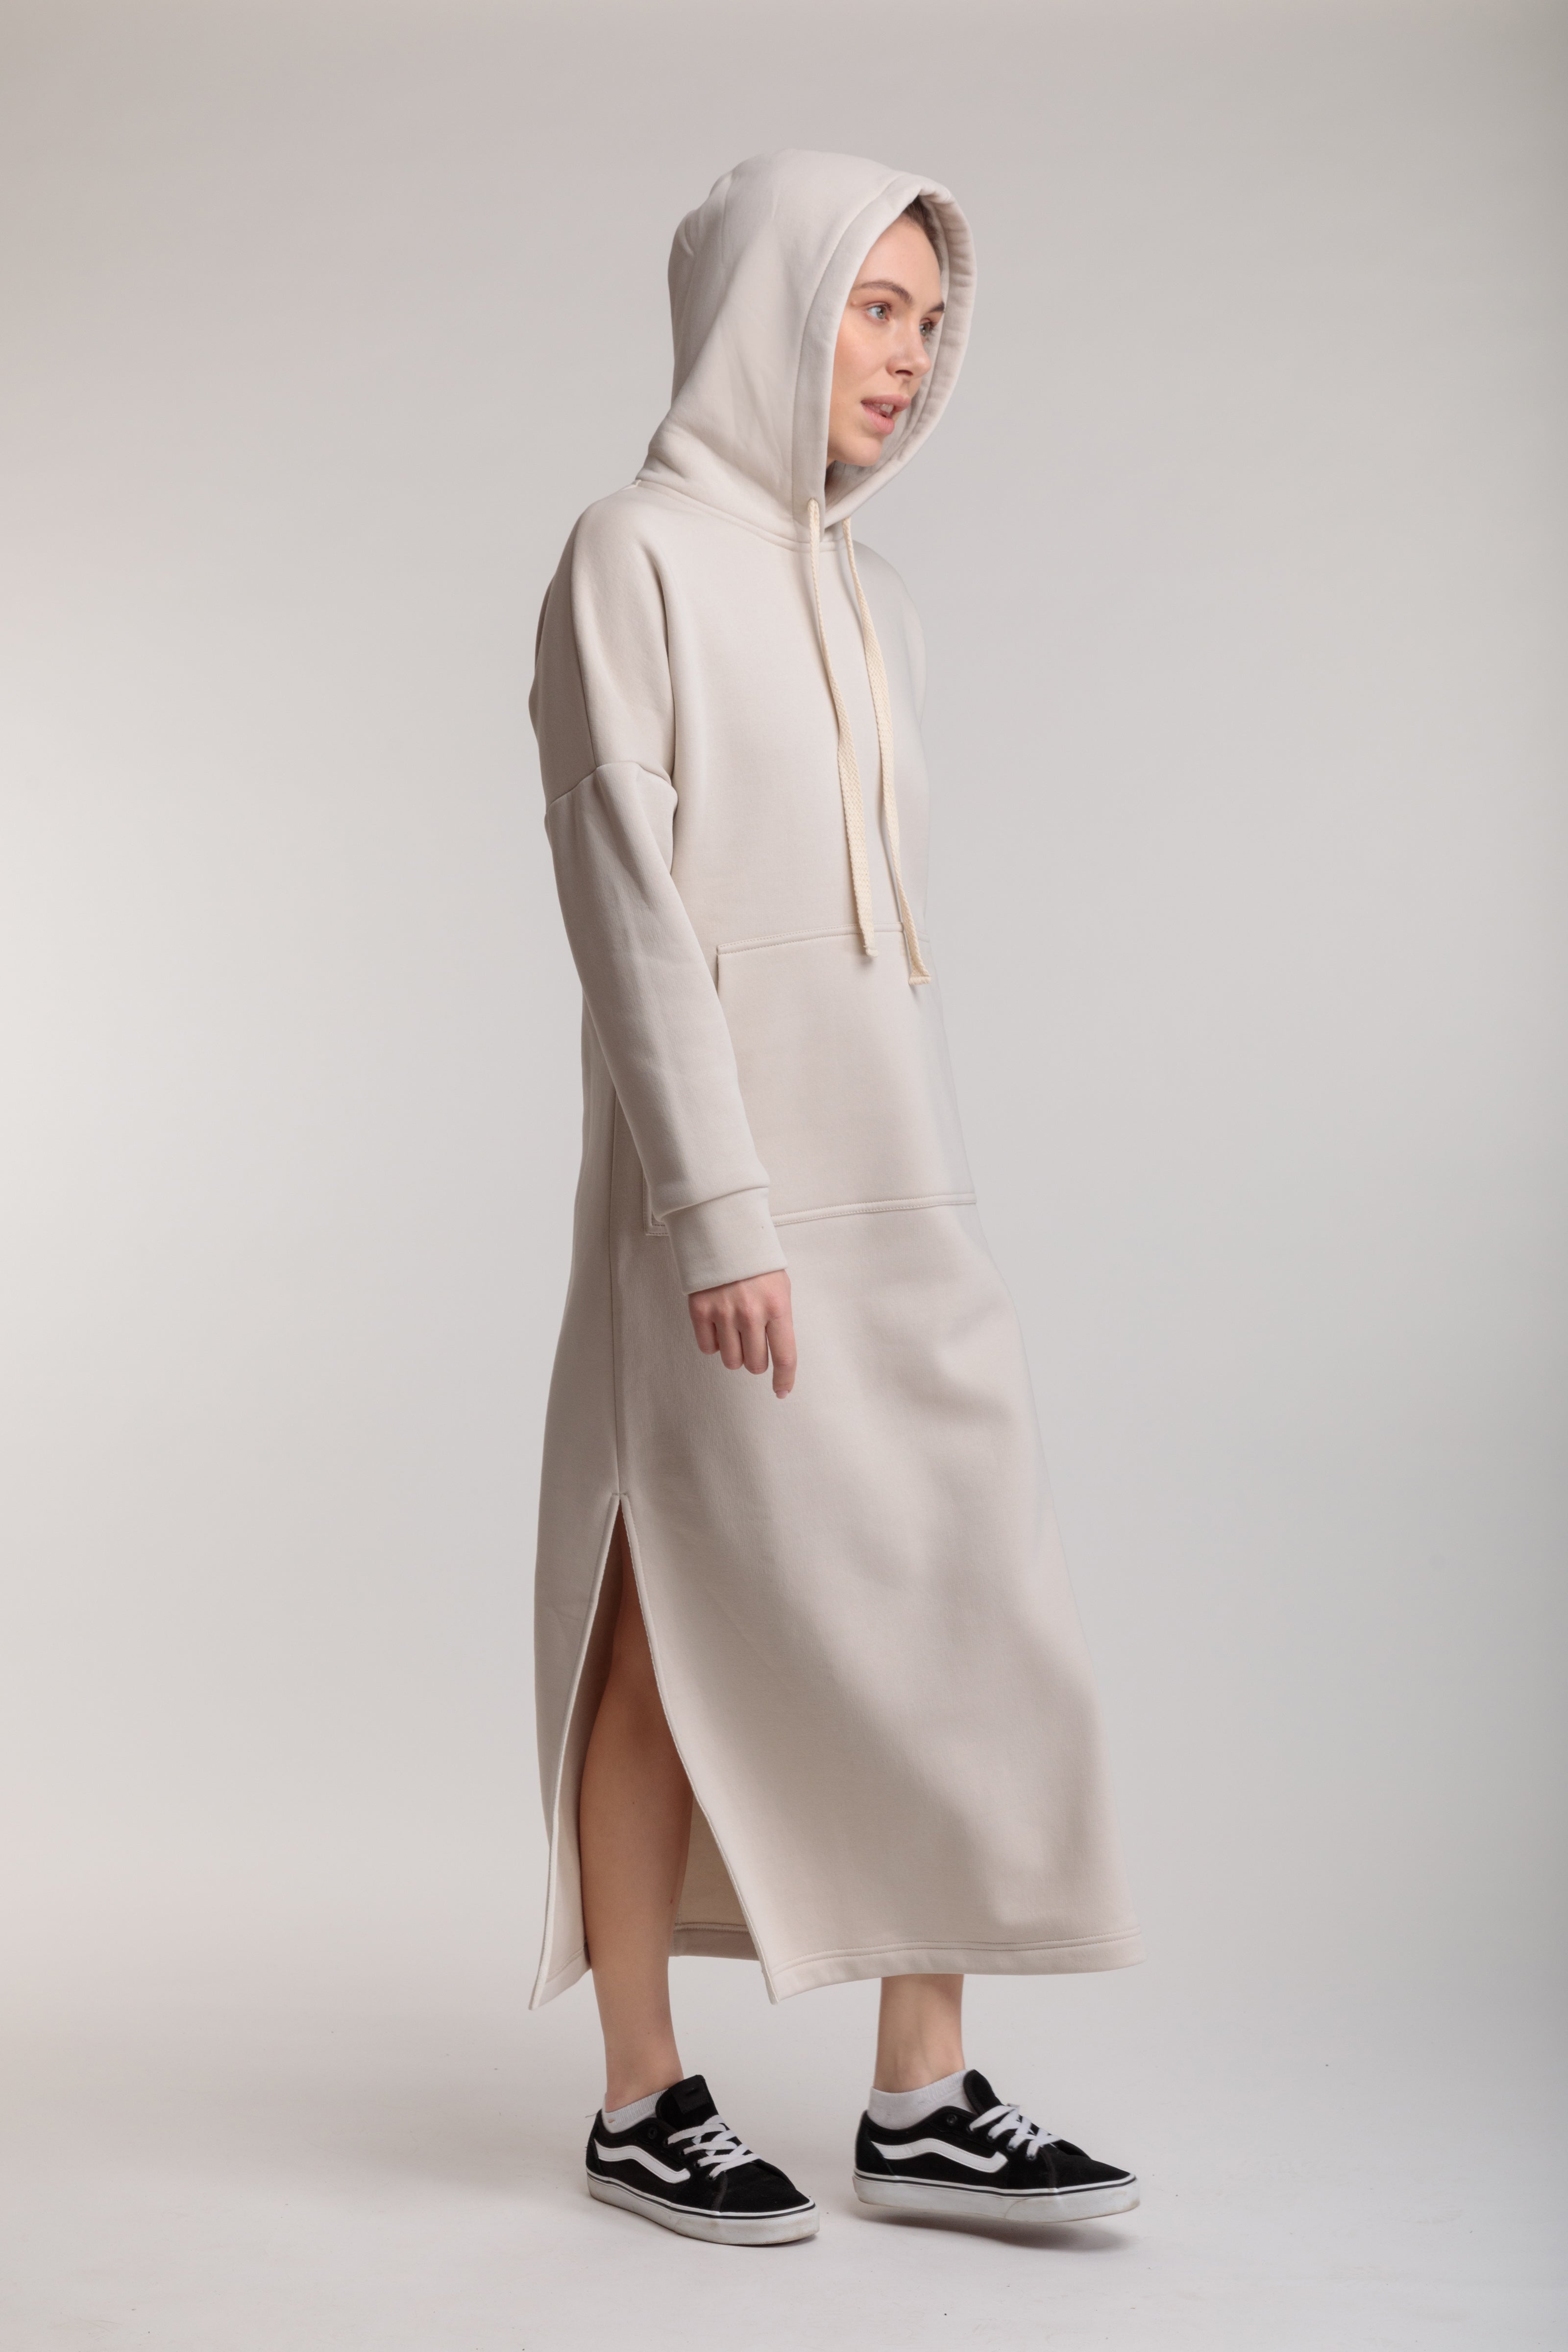 Long straight warm dress in milk color with slits, hood and pocket